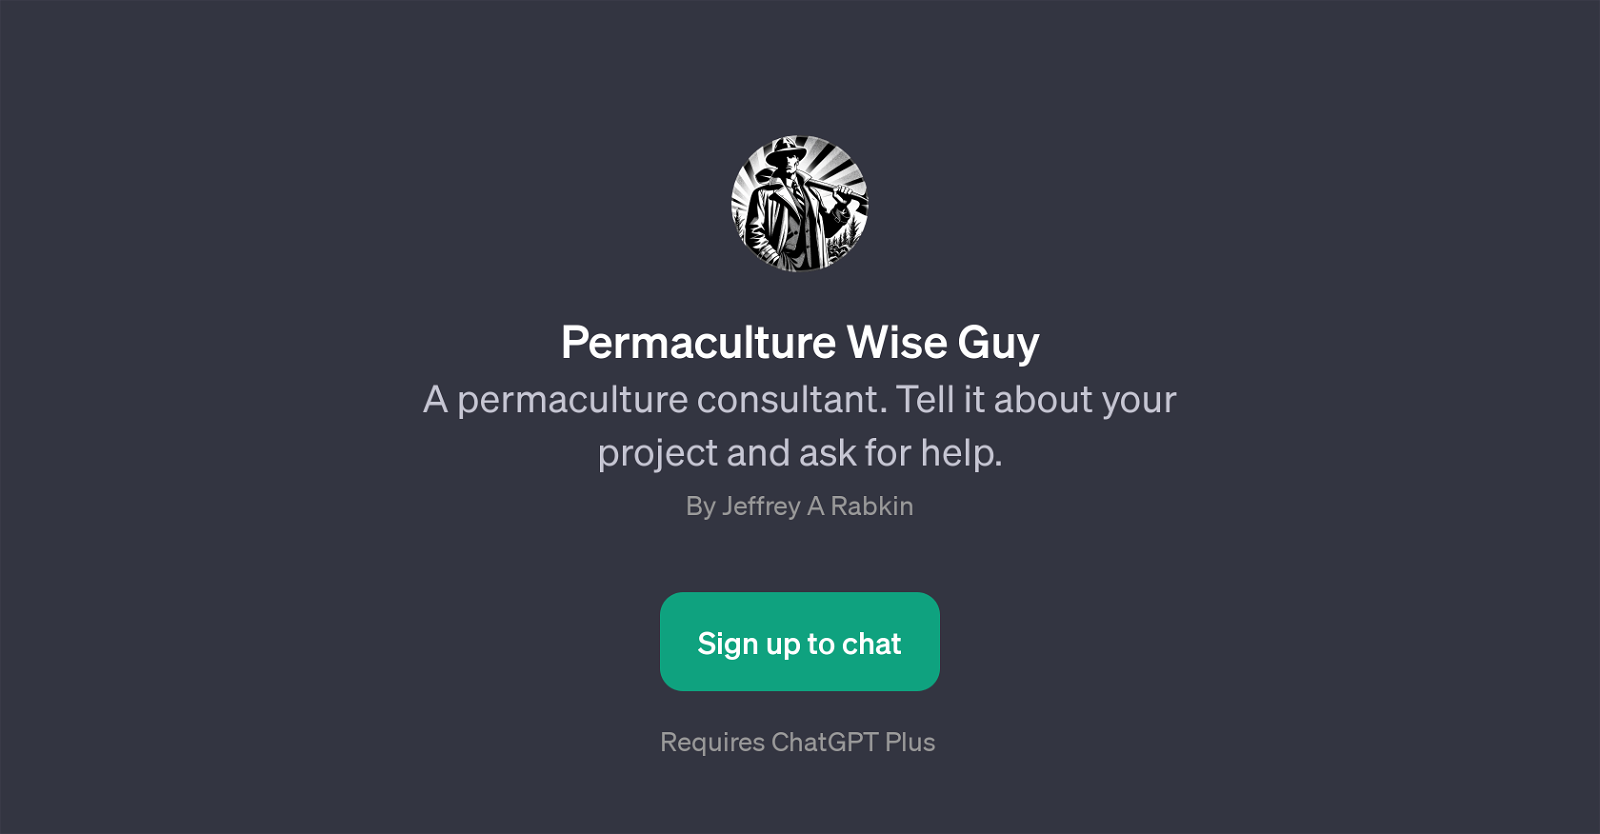 Permaculture Wise Guy website